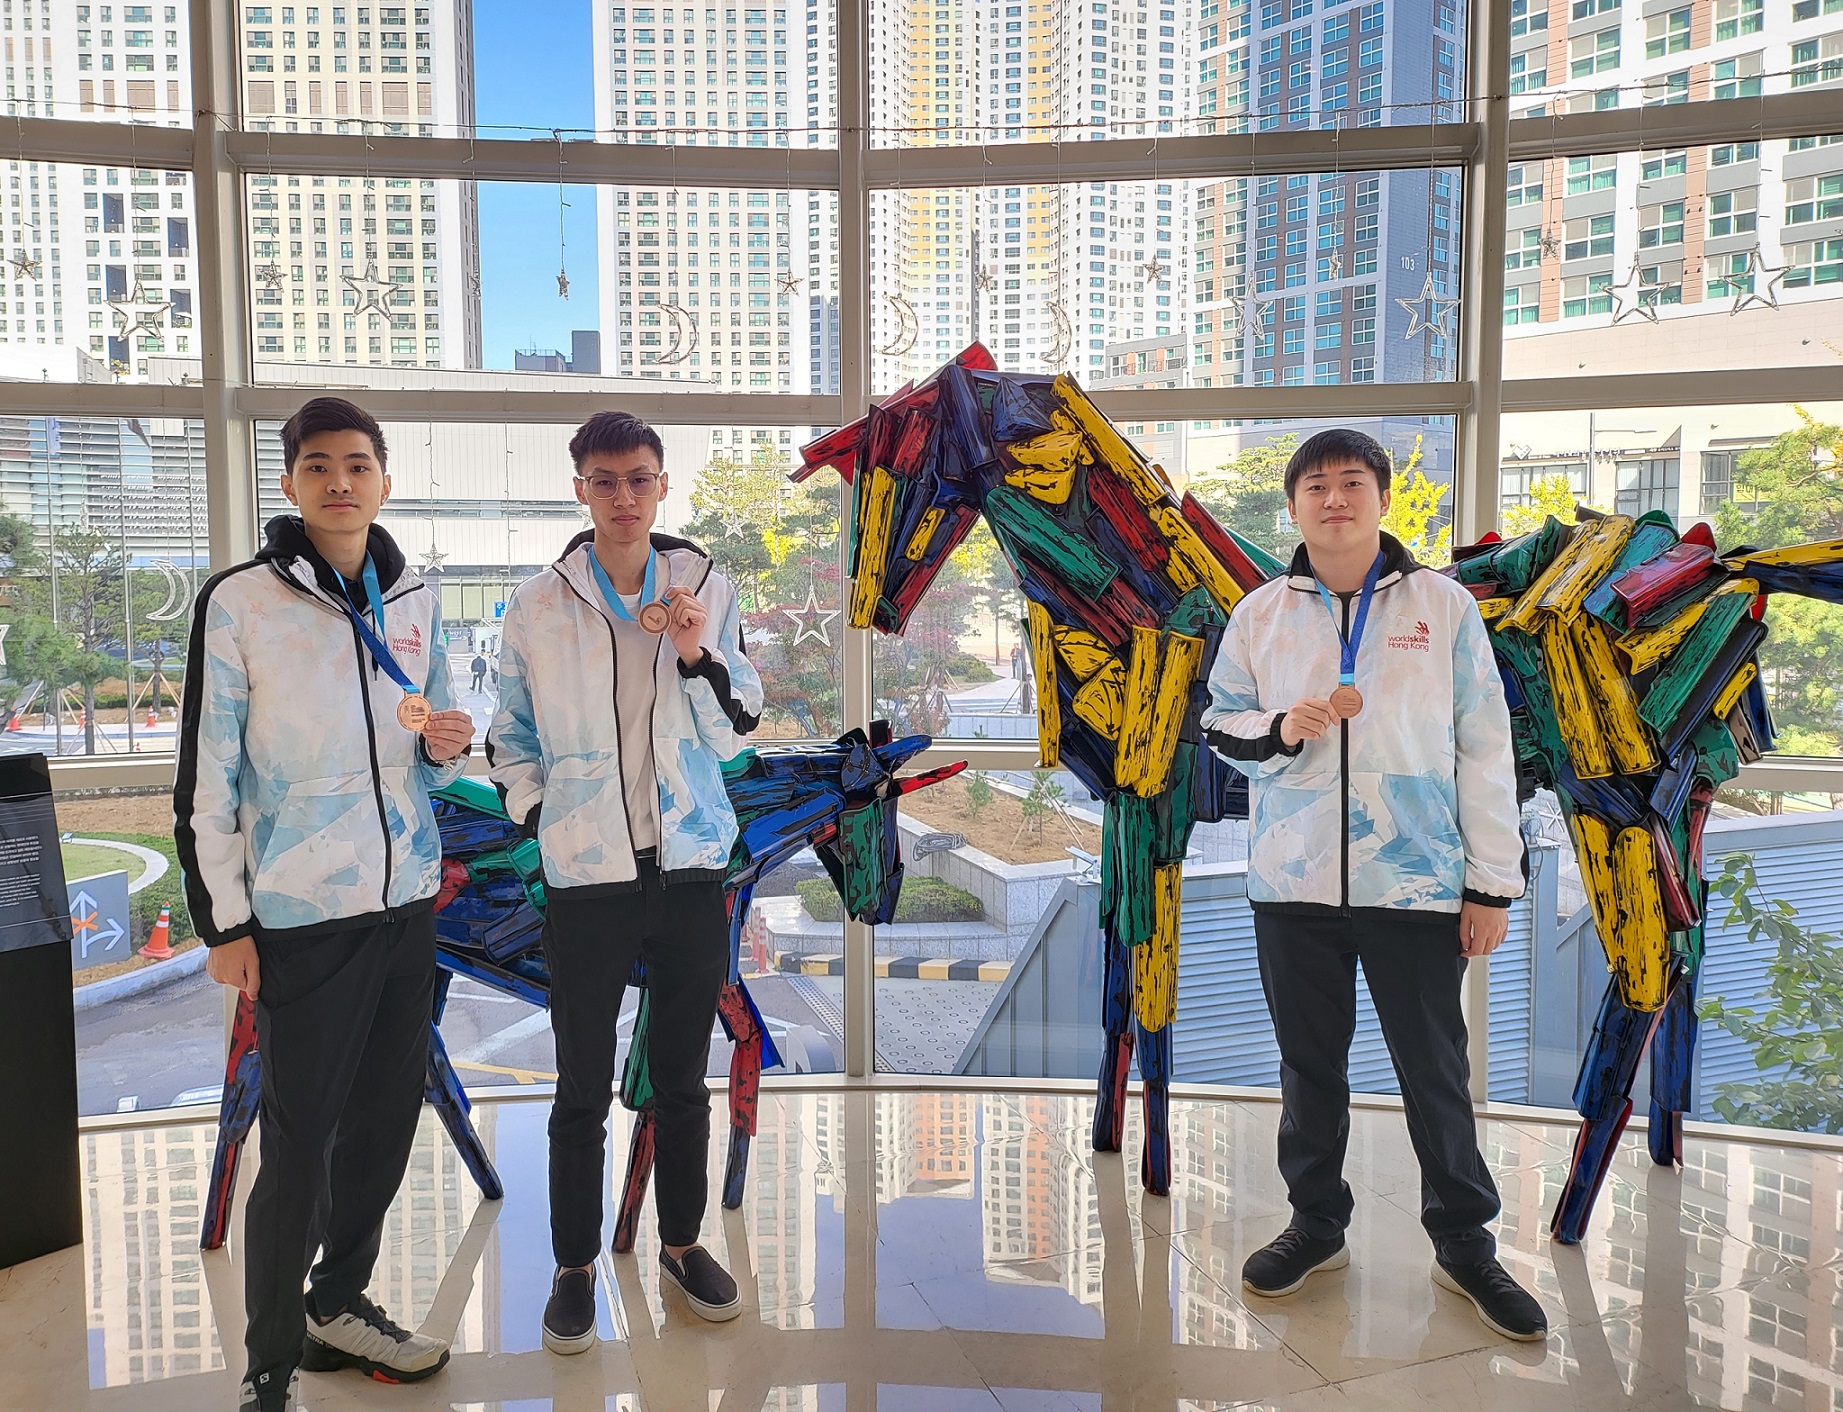 Team Hong Kong achieves a record performance in WorldSkills Competition 2022 Special Edition, and the highest number of medals won over the years with one Gold Medal and 12 Medallions for Excellence, including Medallions for Excellence awarded in three IT related trades of 3D Digital Game Art, Cloud Computing and Mobile Applications Development